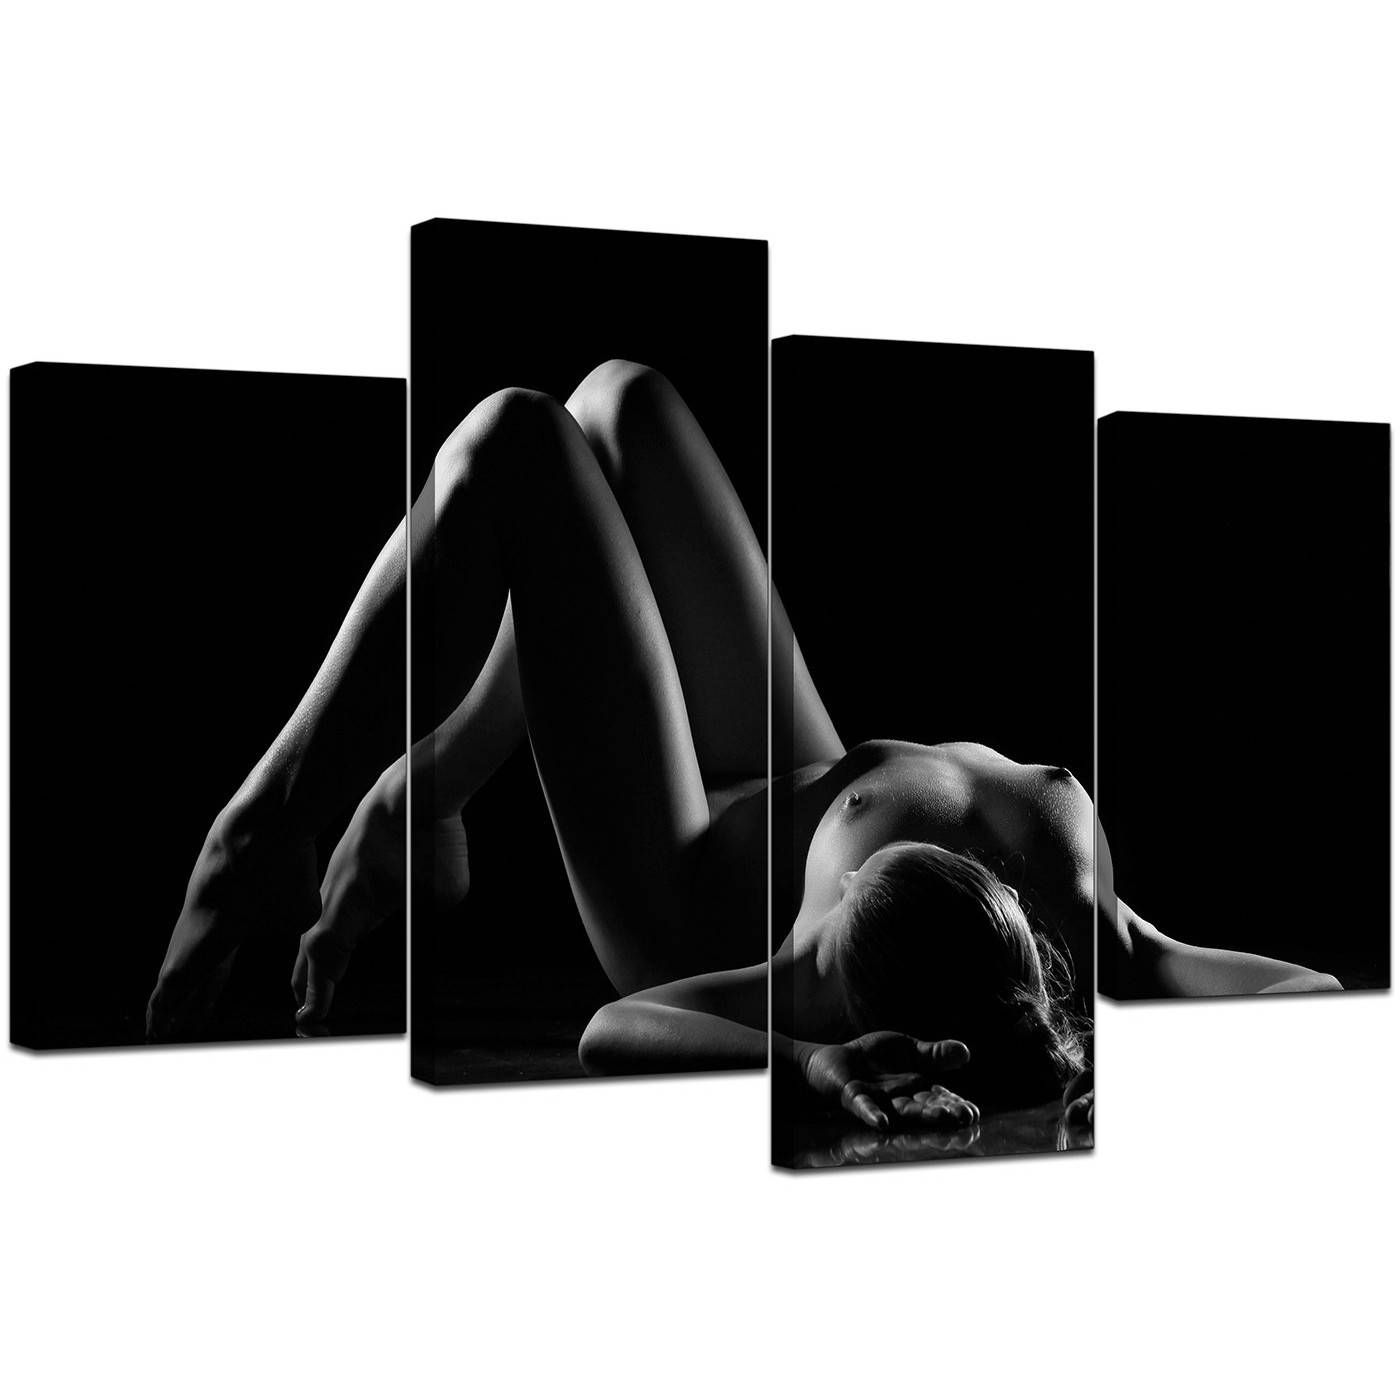 Sensual Canvas Art In Black & White For Your Bedroom Throughout Best And Newest Cheap Black And White Wall Art (View 1 of 20)